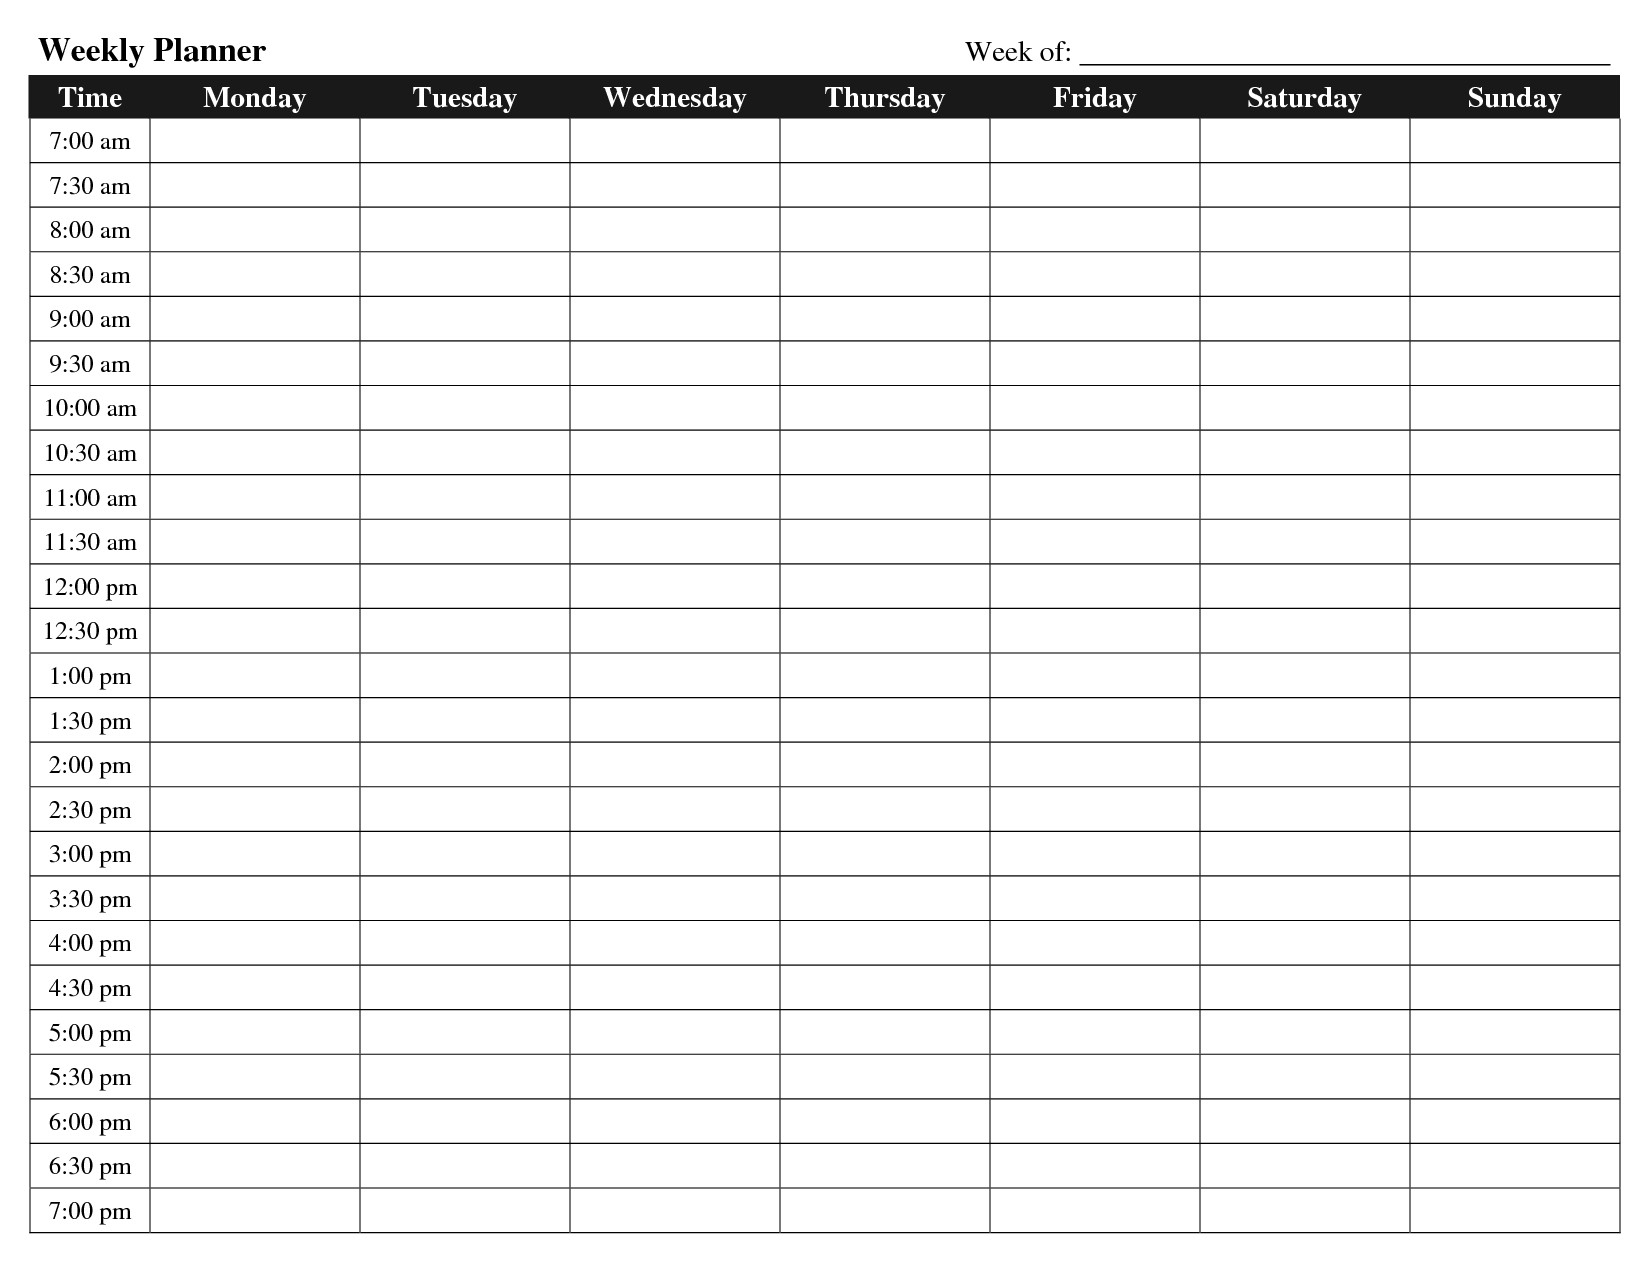 Blank Daily Schedule With Time Slots  Calendar for Week Calendar With Time Slots